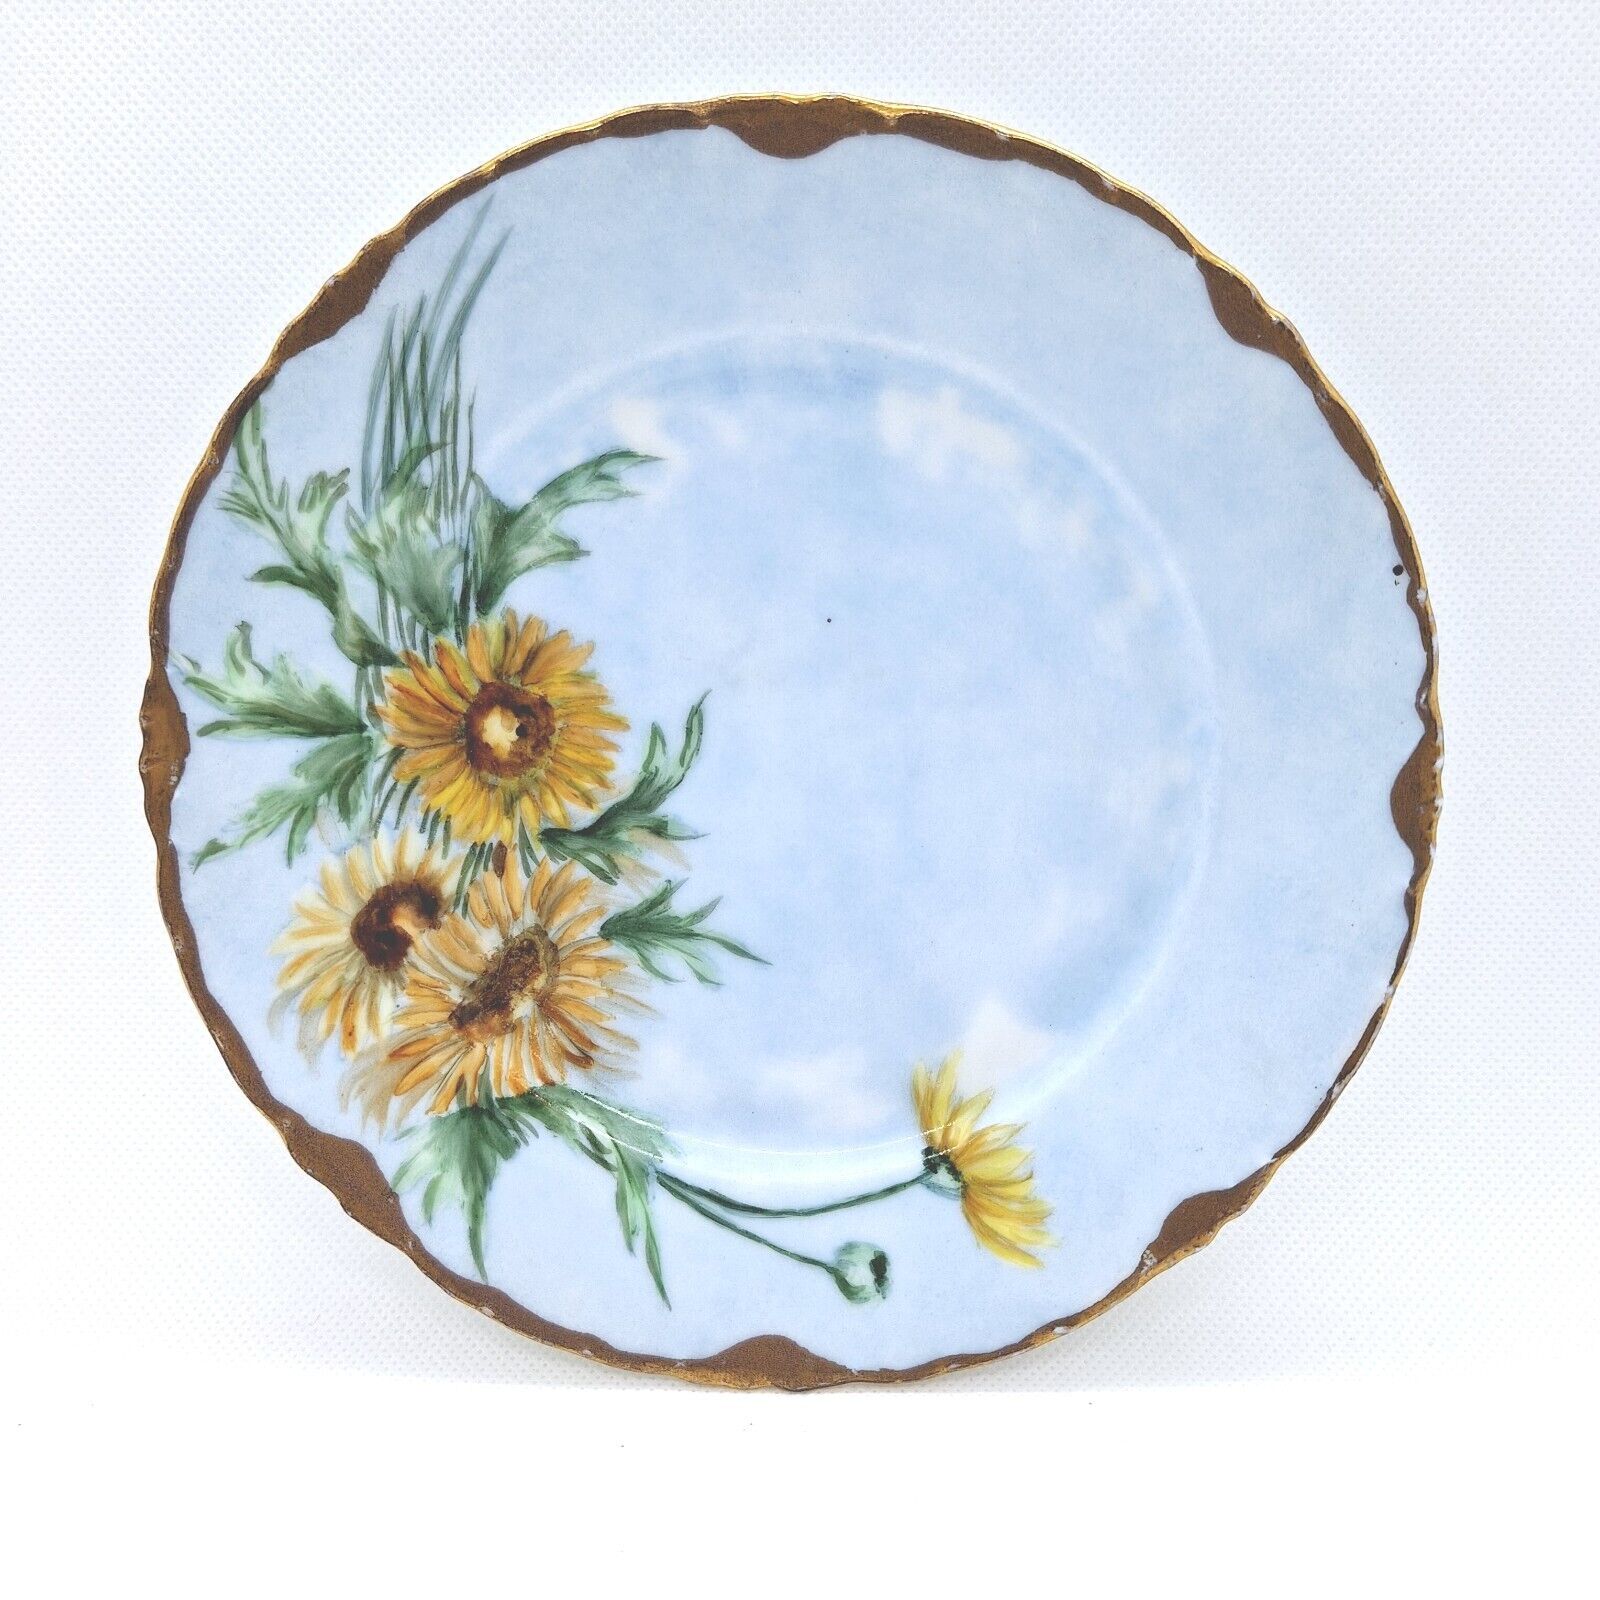 Rosenthale Bavaria Hand Painted Daisy Floral Plate 1908 Antique